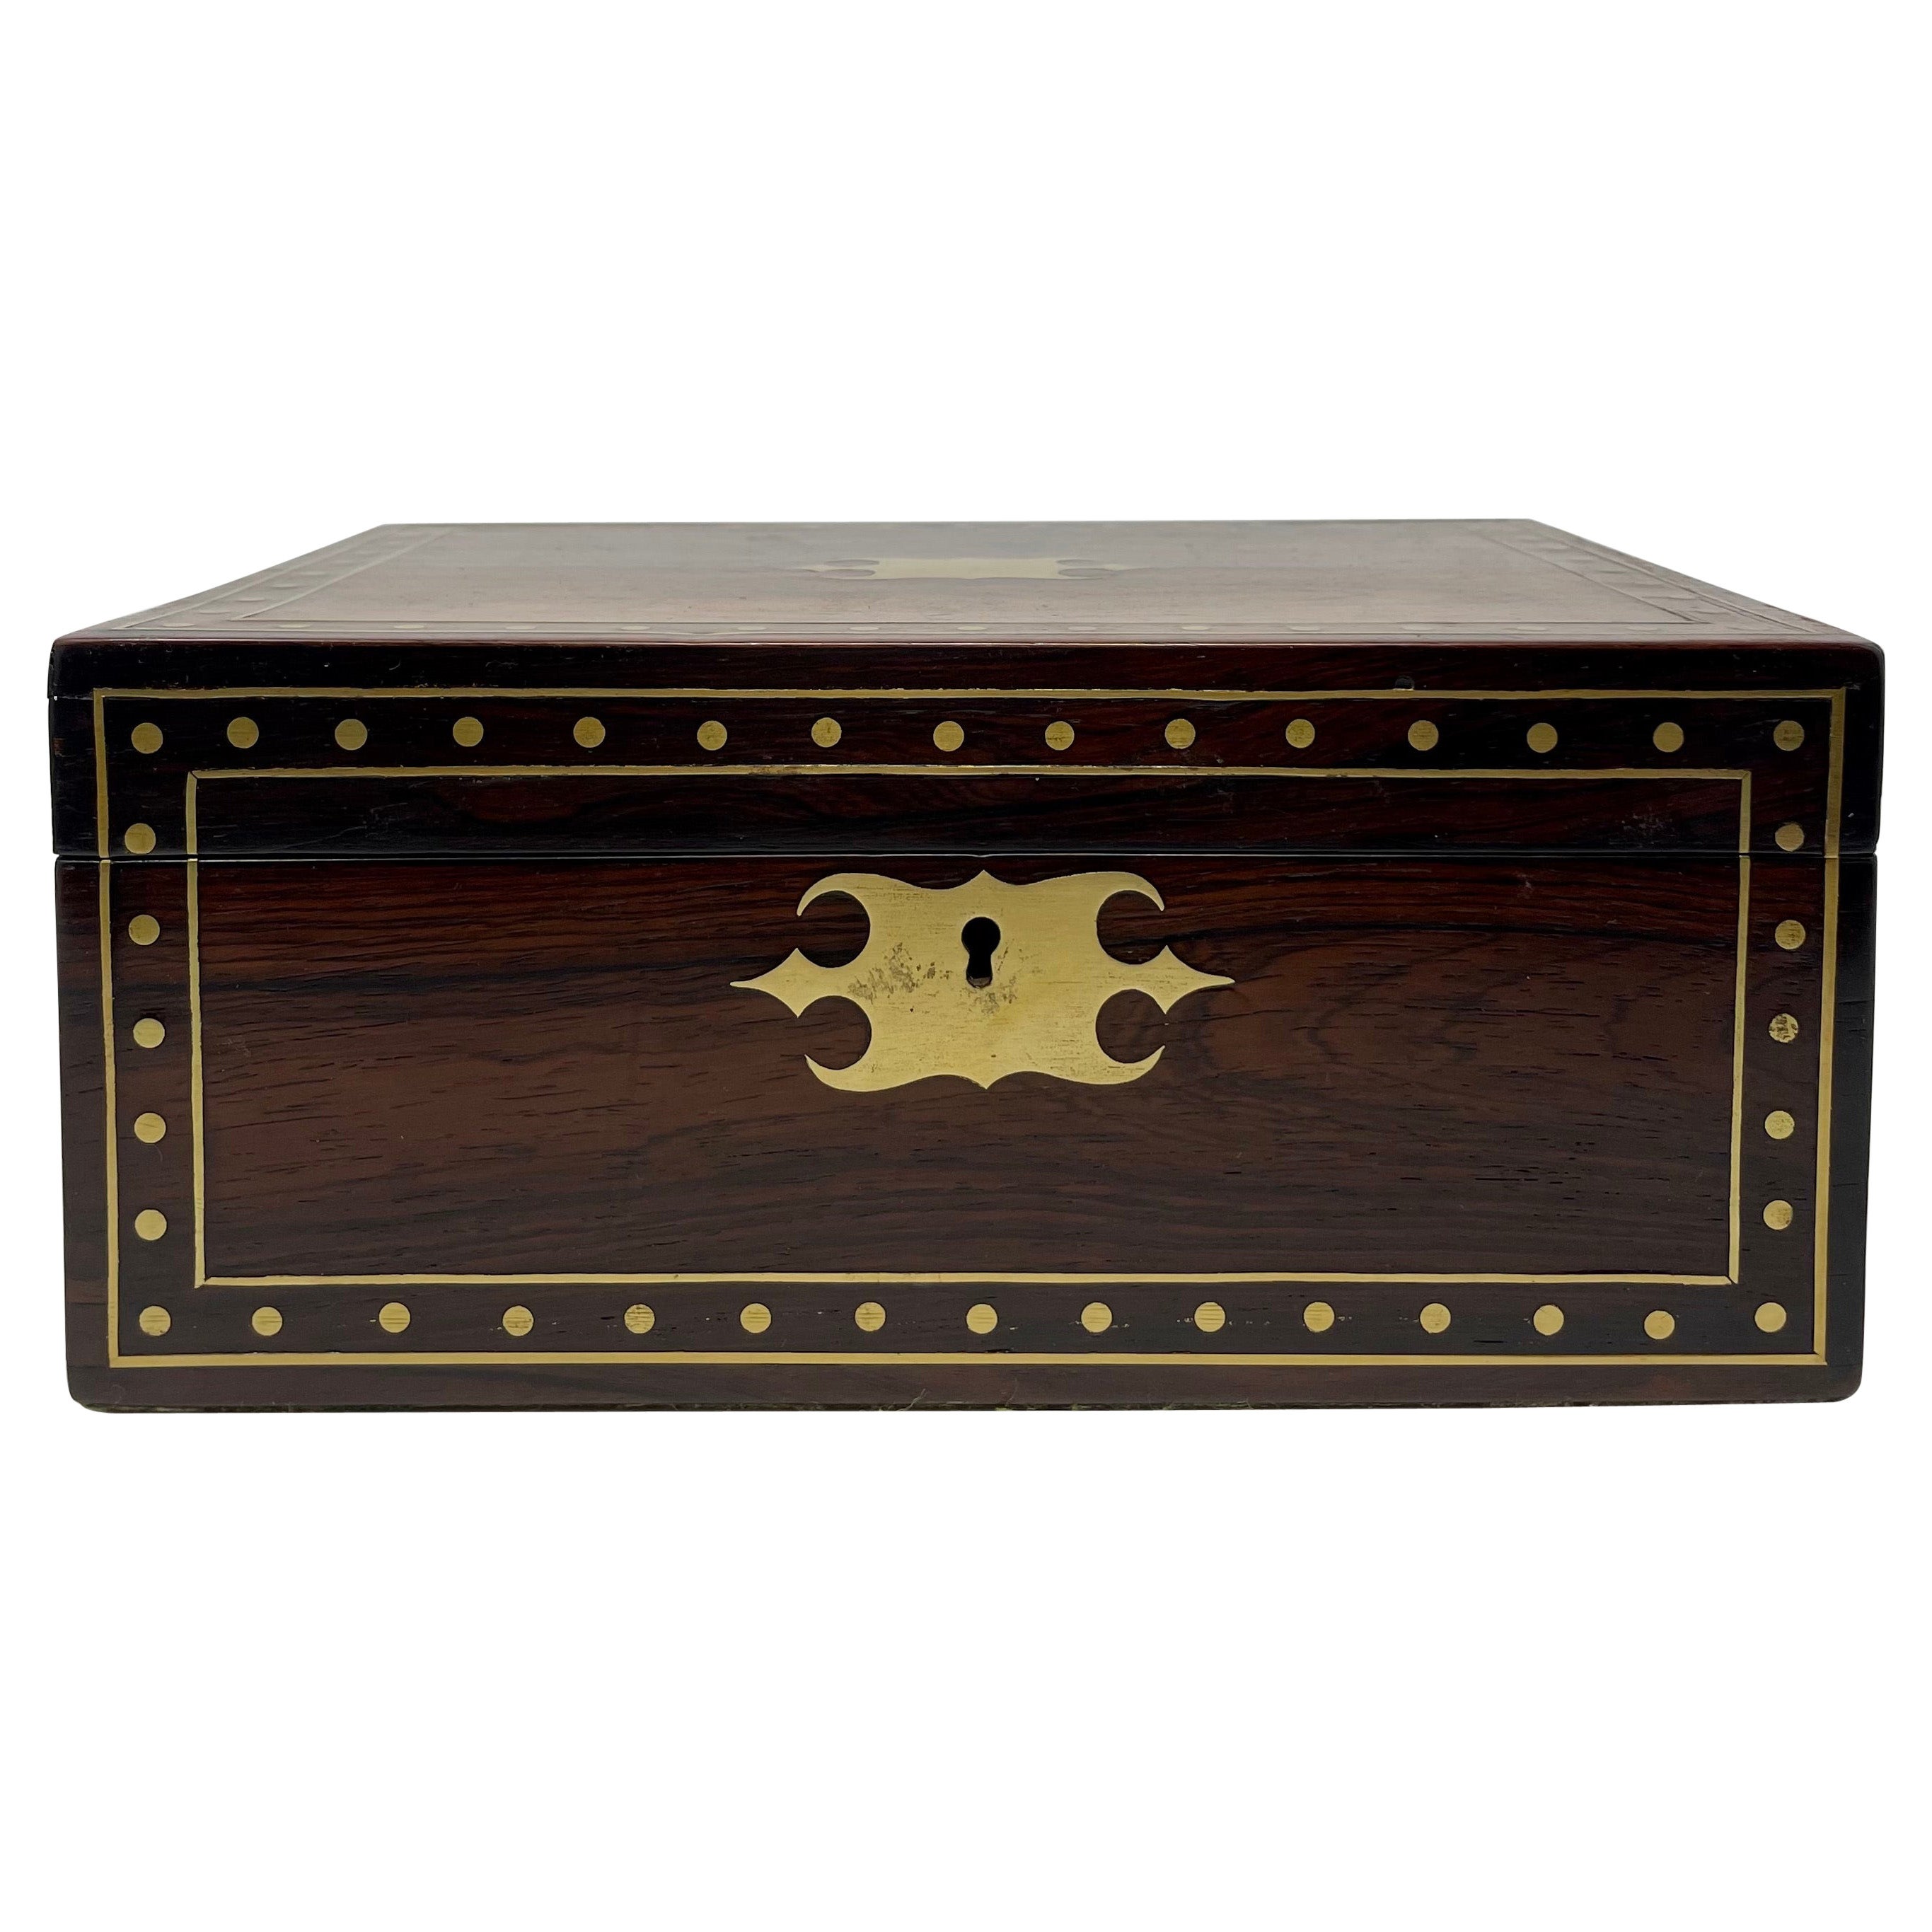 Antique English Regency Period Rosewood Inlaid Box, Circa 1820. For Sale